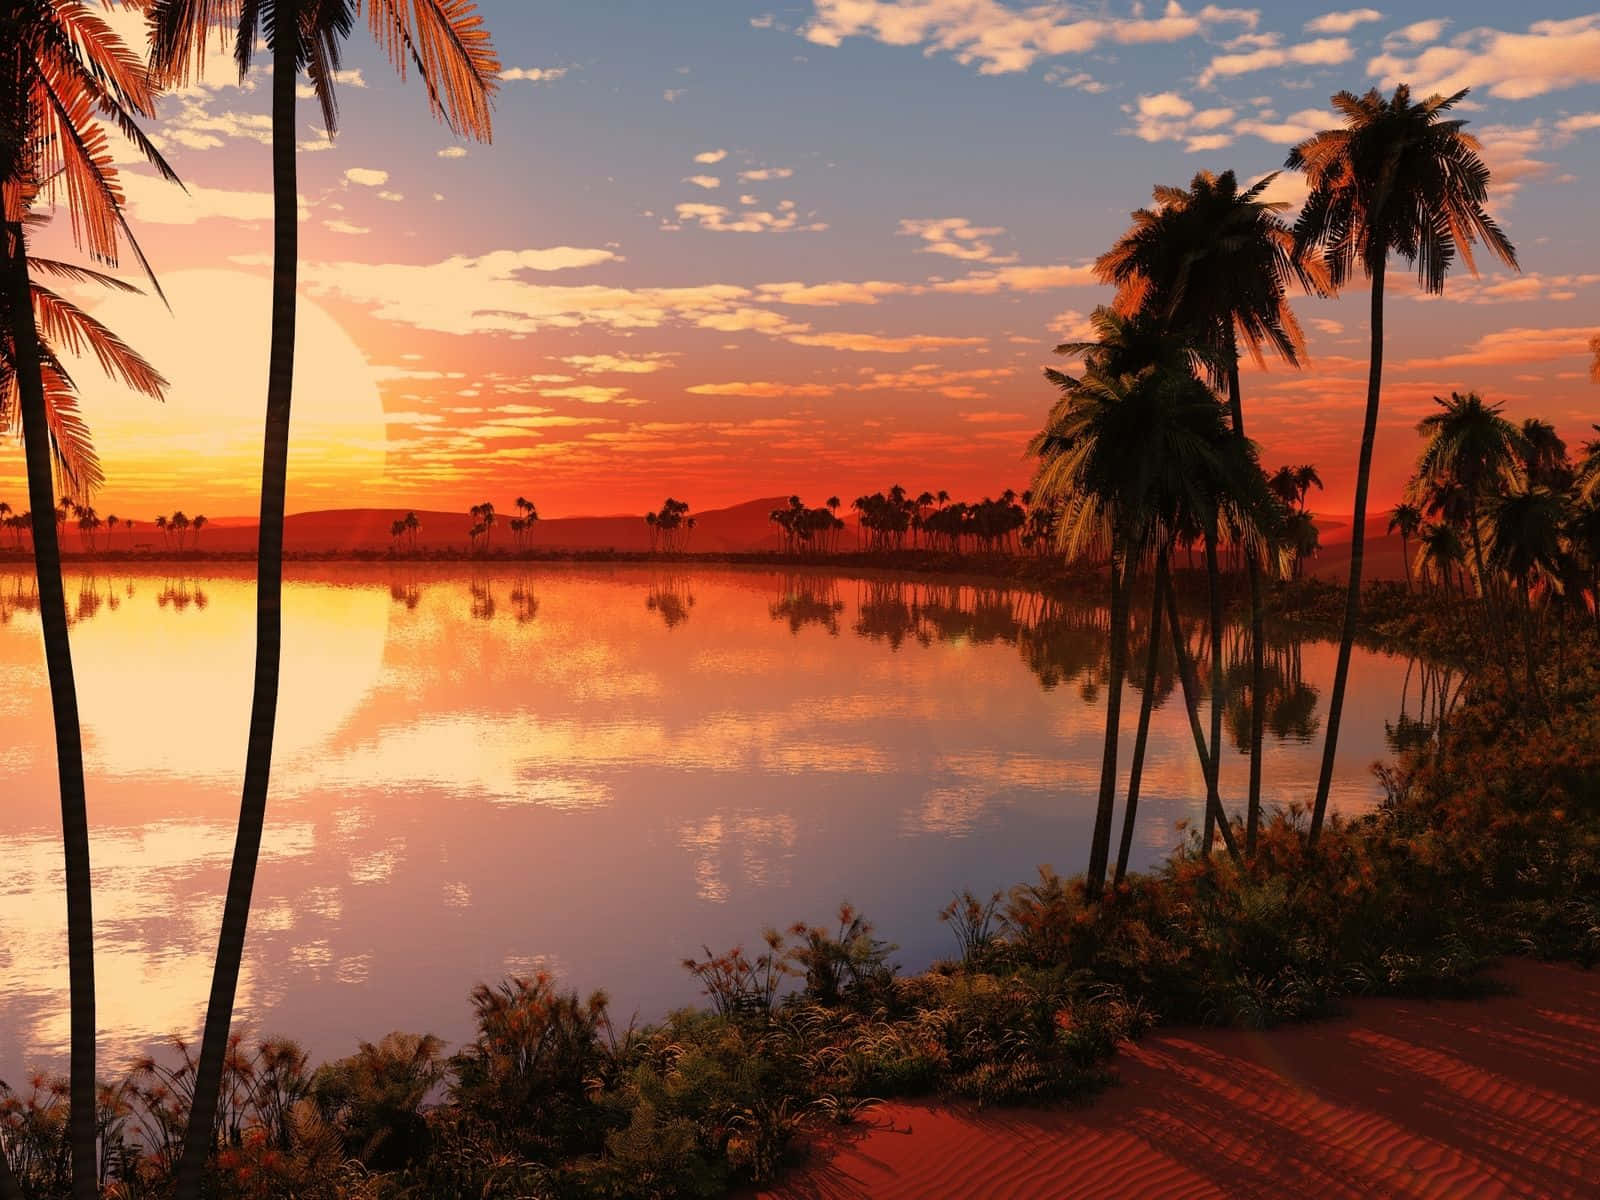 a sunset scene with palm trees and a lake